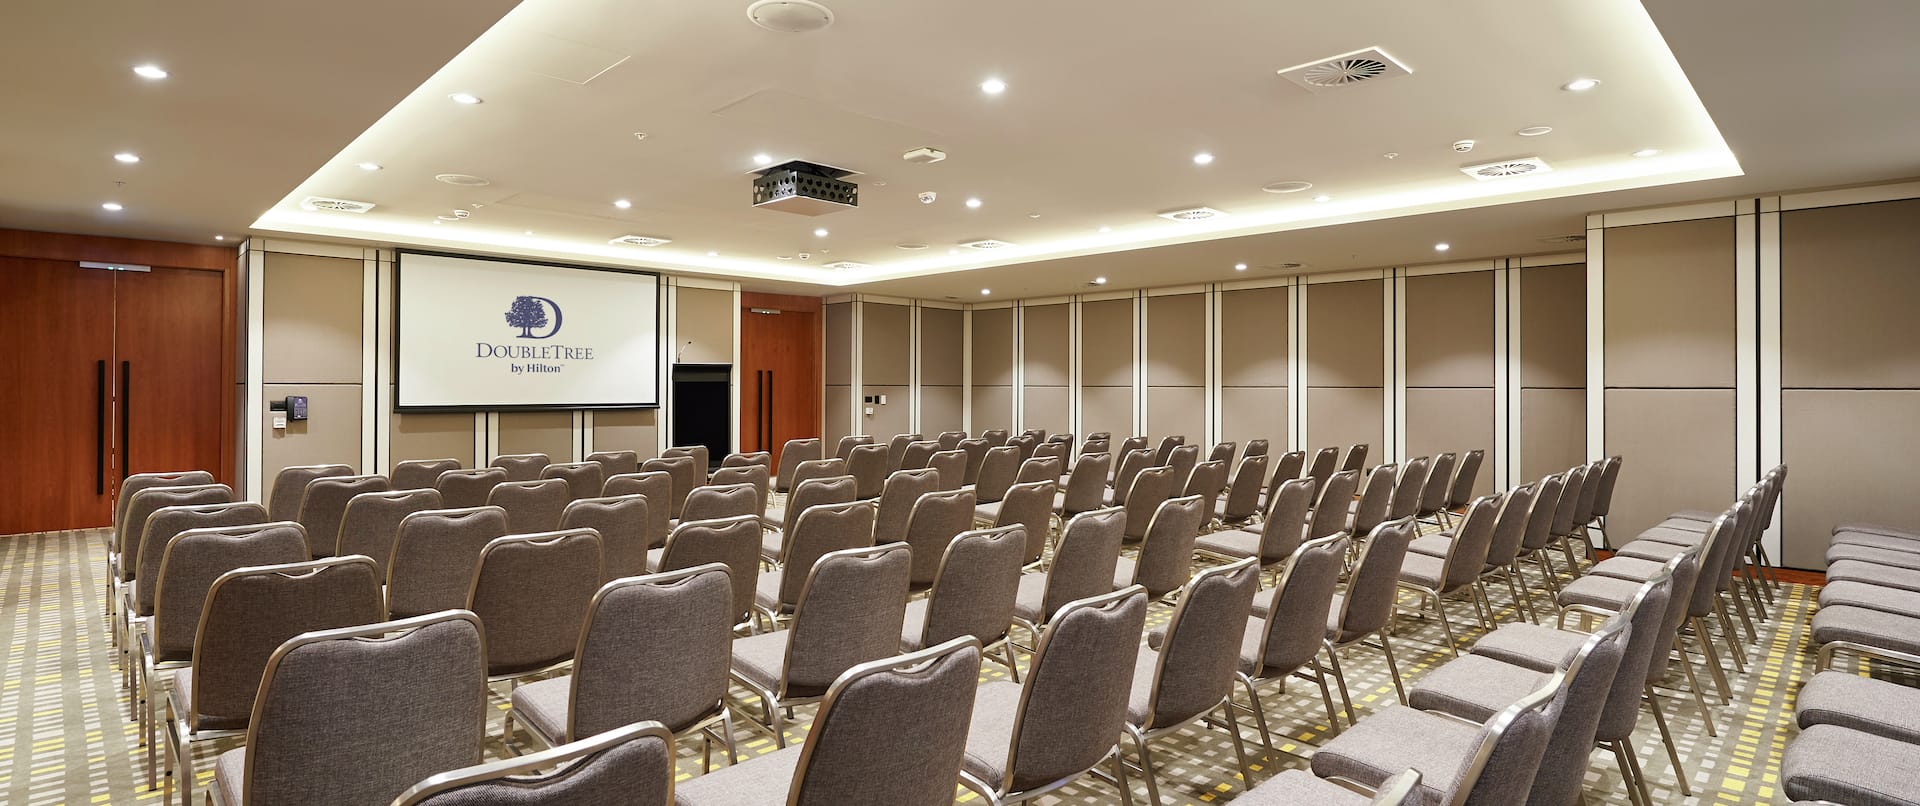 Jarrah Meeting Room with Chairs and Projector Screen